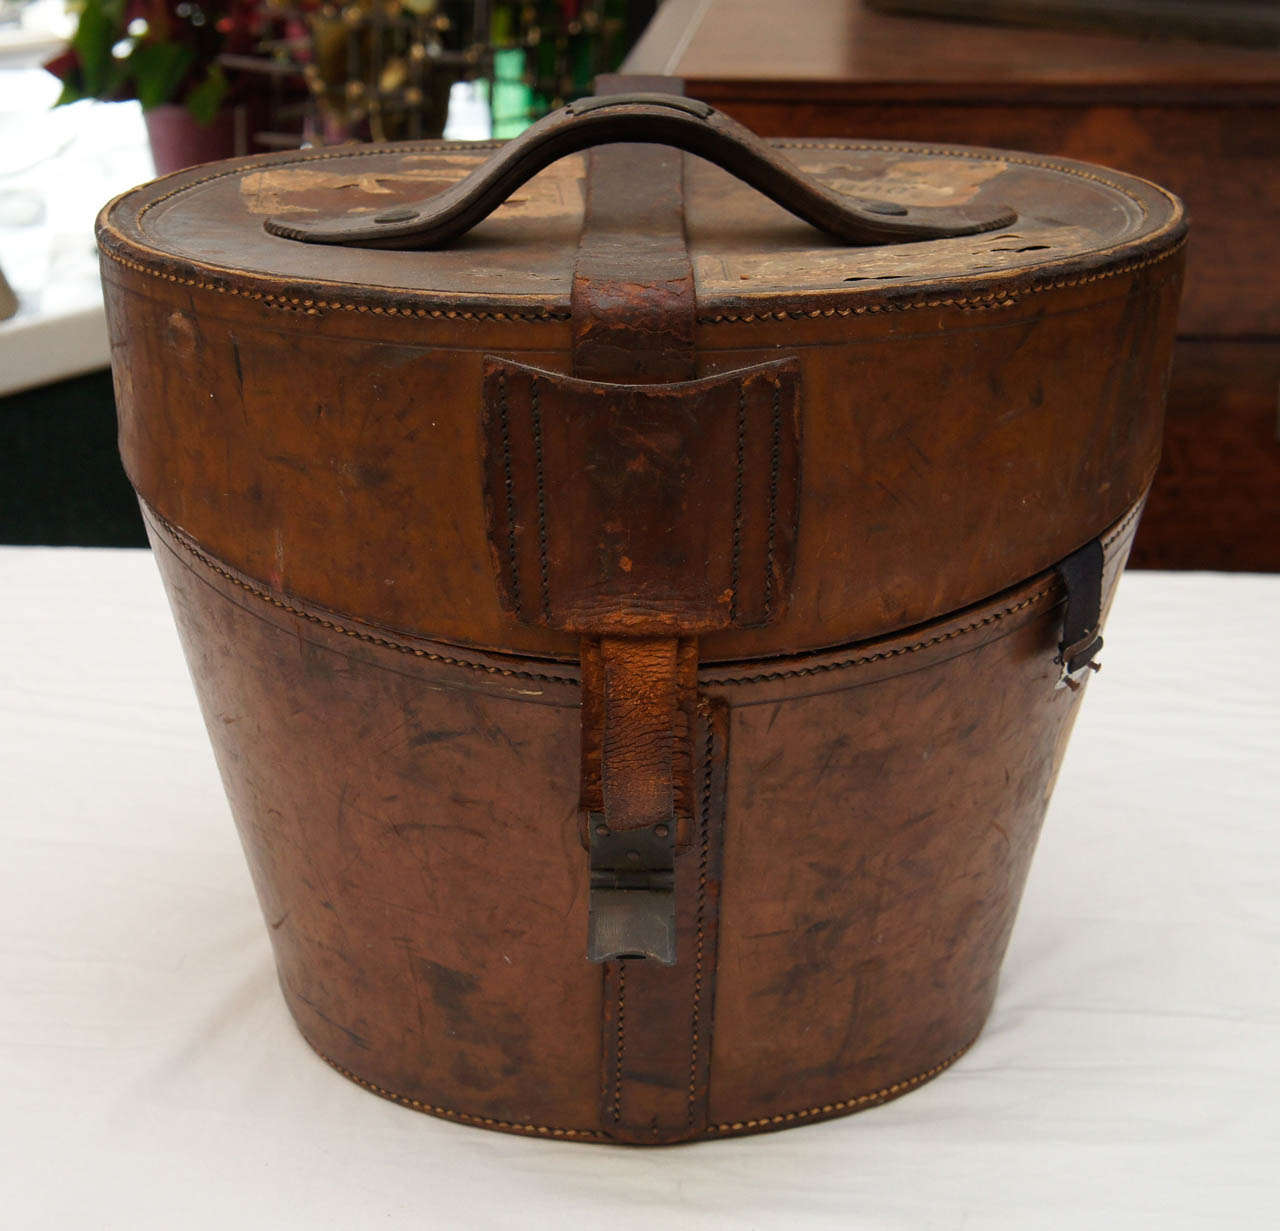 Sold at Auction: VINTAGE LEATHER HAT BOX